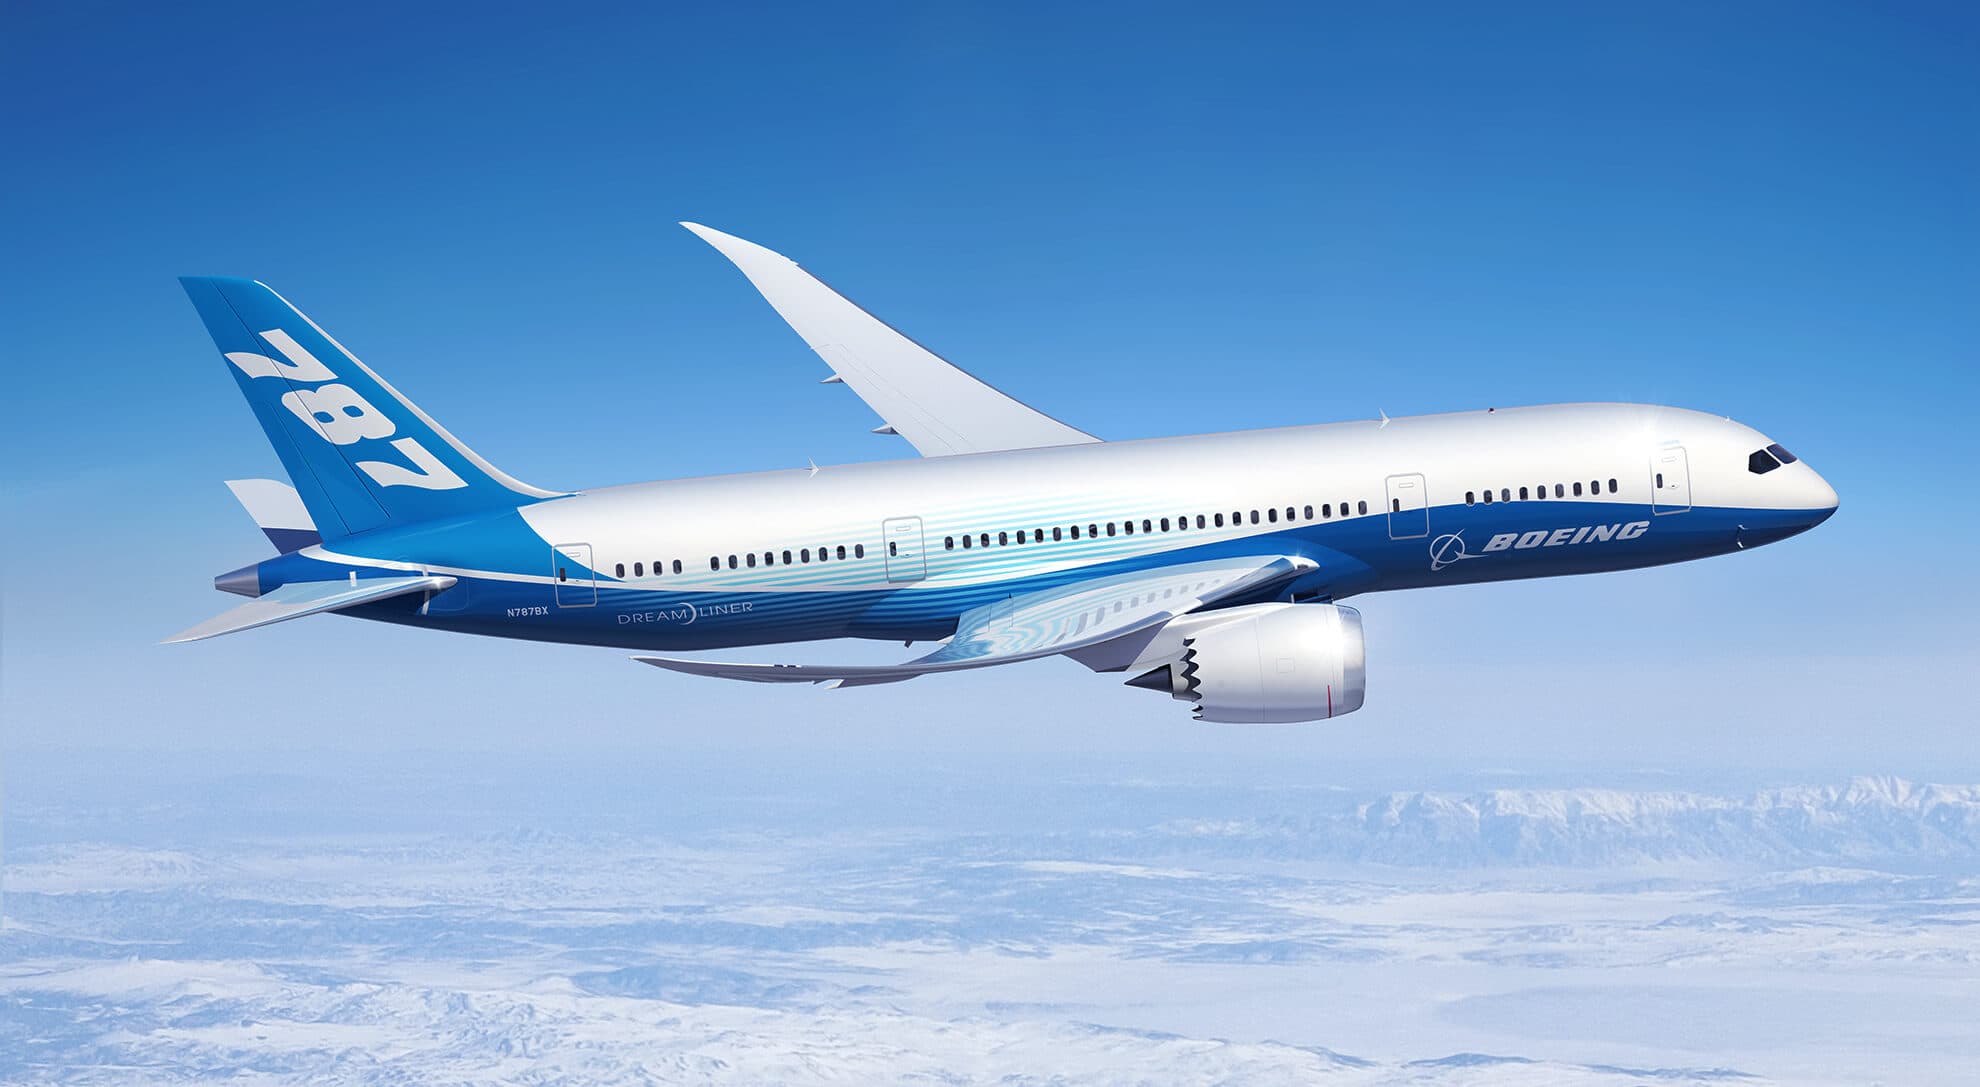 Boeing 787 flying through the sky with Boeing branded livery